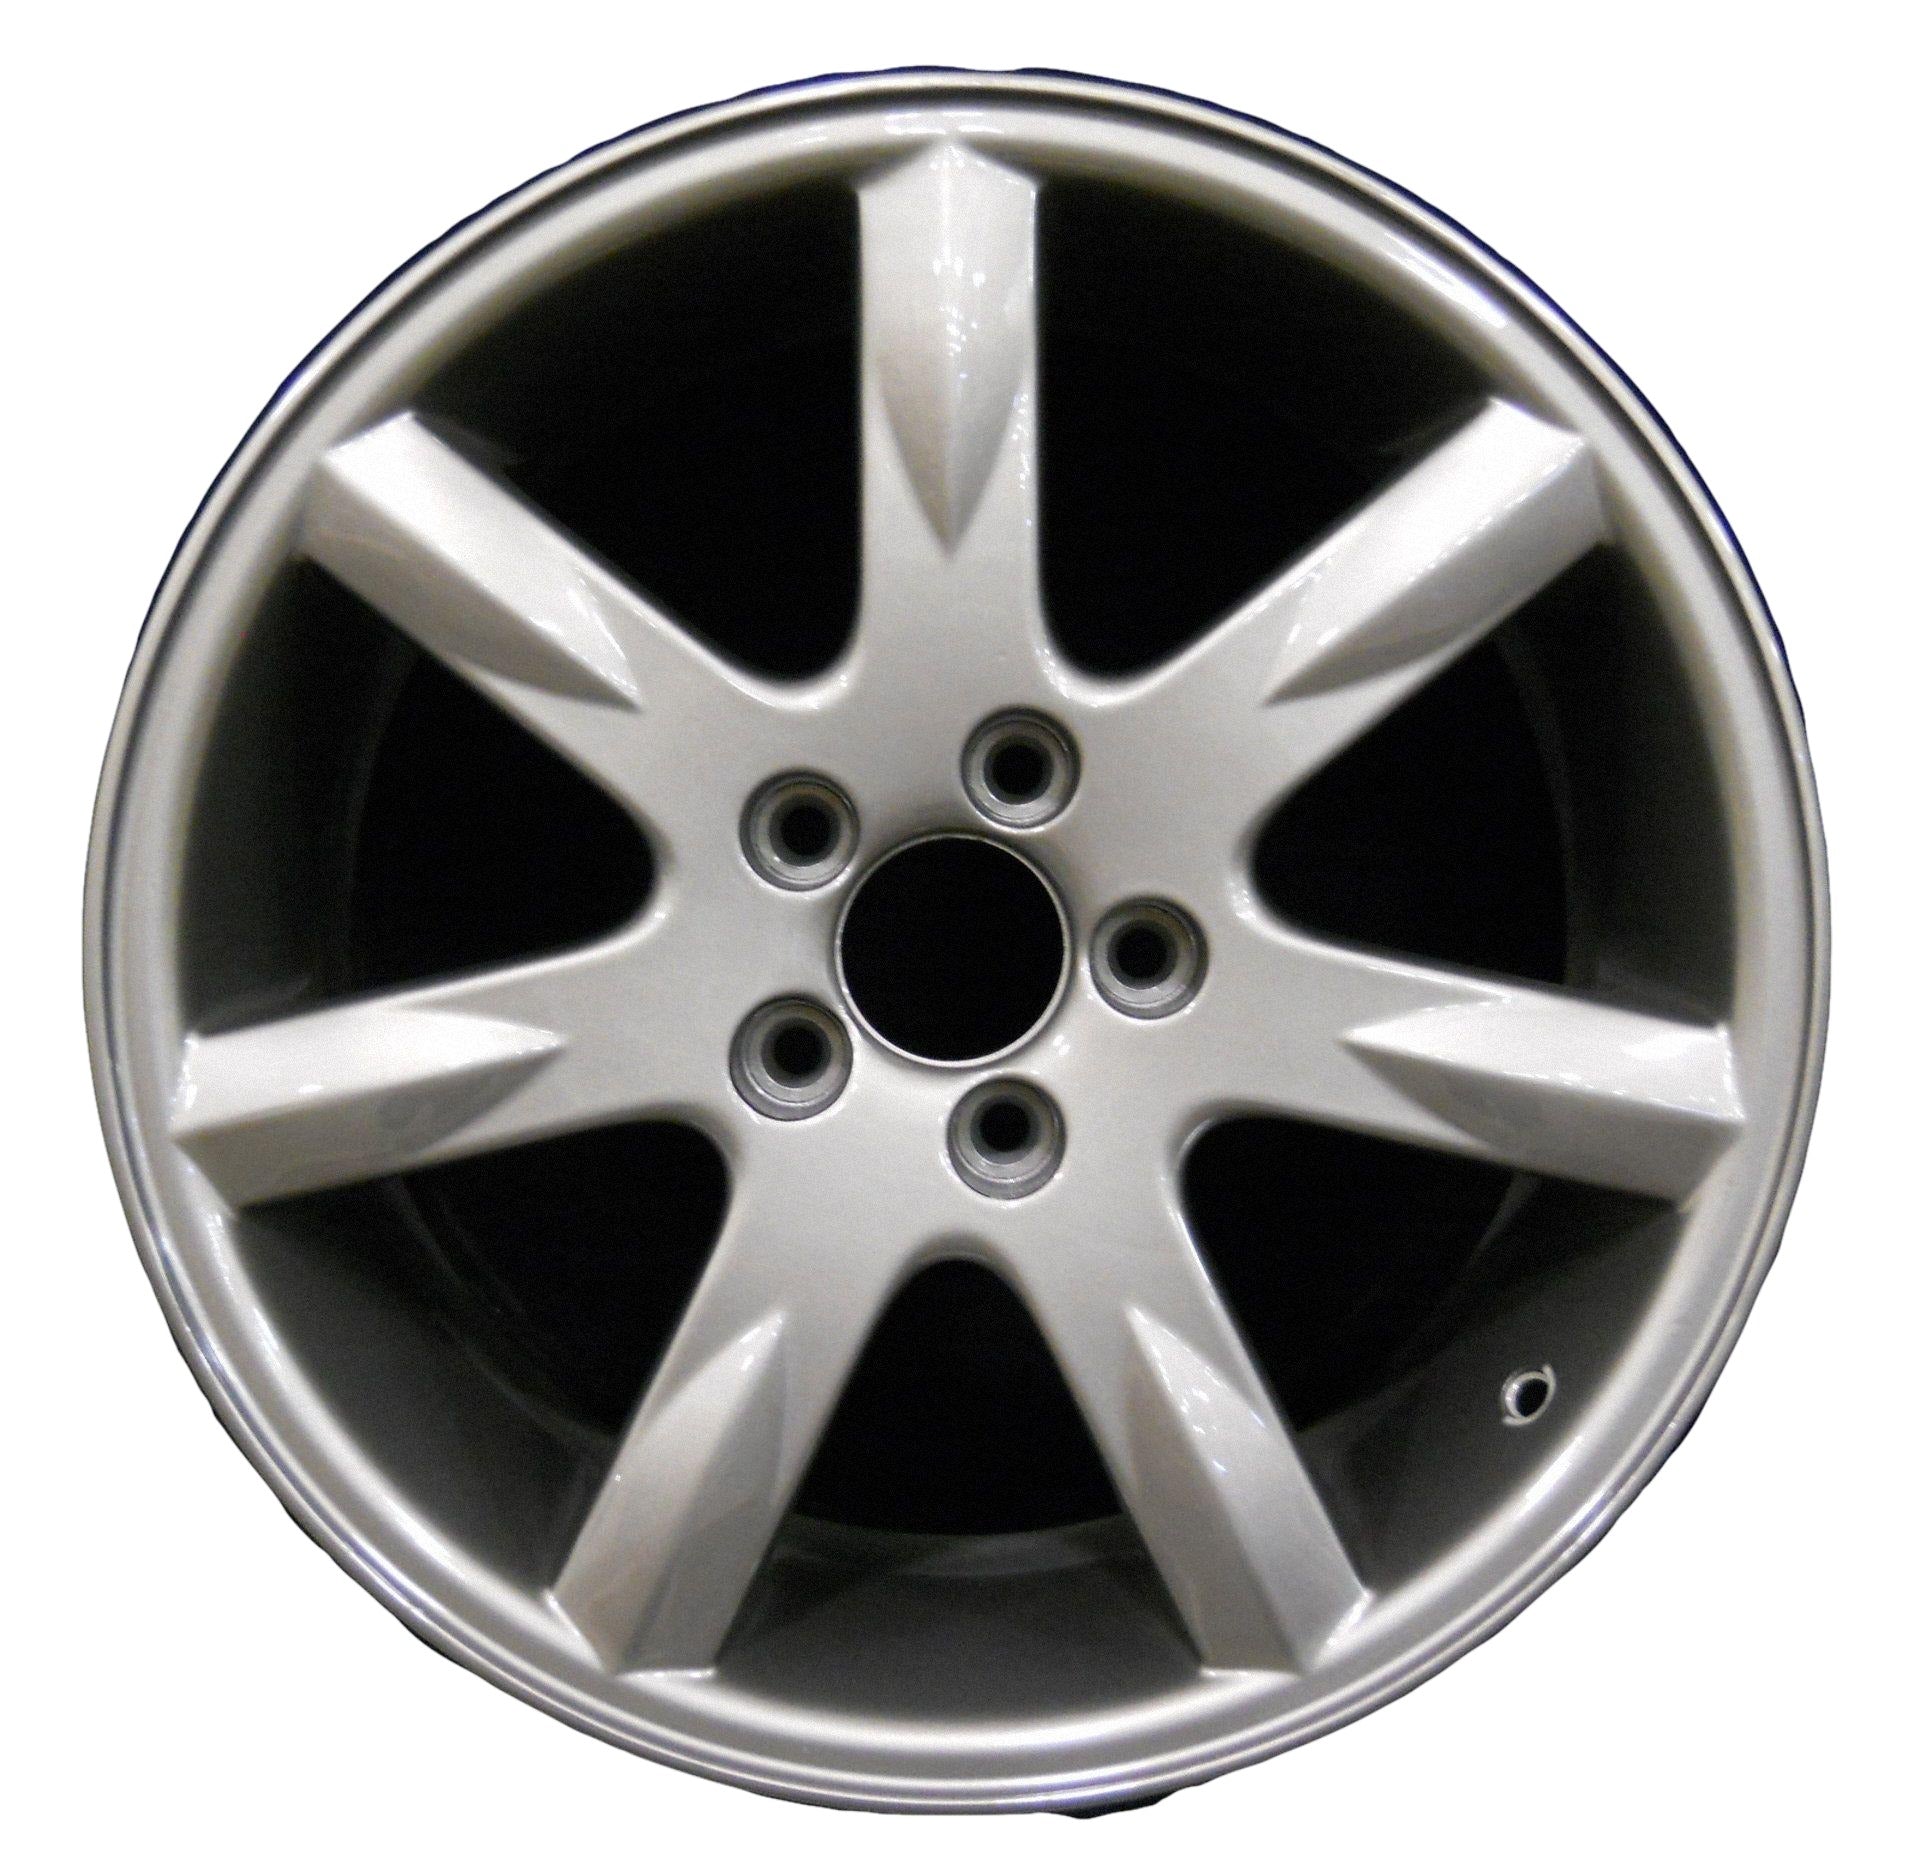 Volvo 70 Series  1998, 1999, 2000 Factory OEM Car Wheel Size 17x7 Alloy WAO.70193.LC25.FF